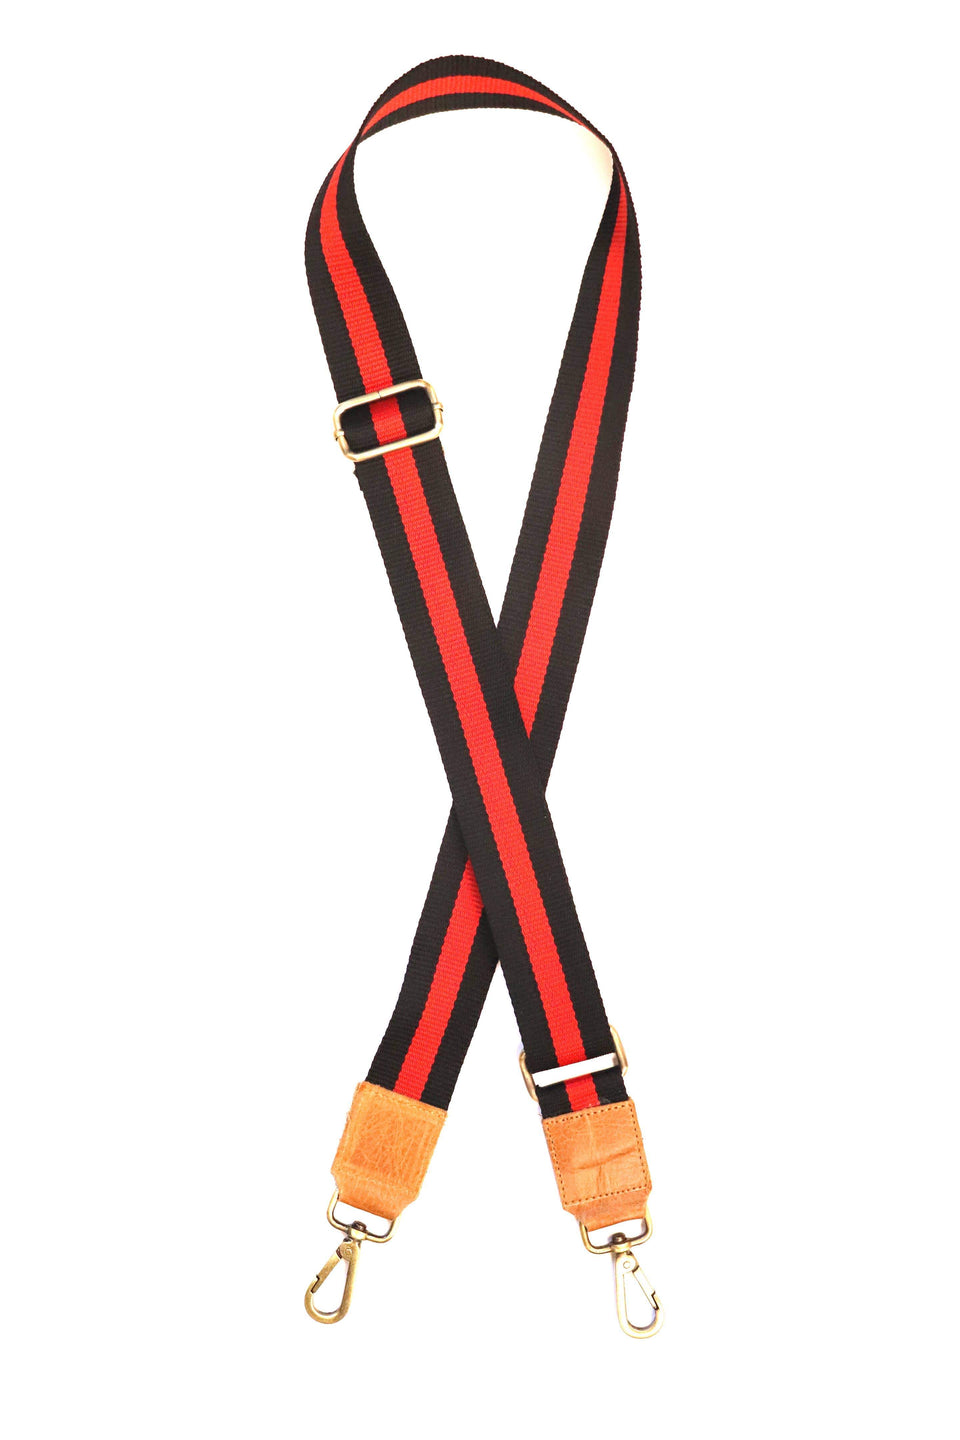 Adjustable Bag Strap - Red and Black Stripe. bag and purse accessories 